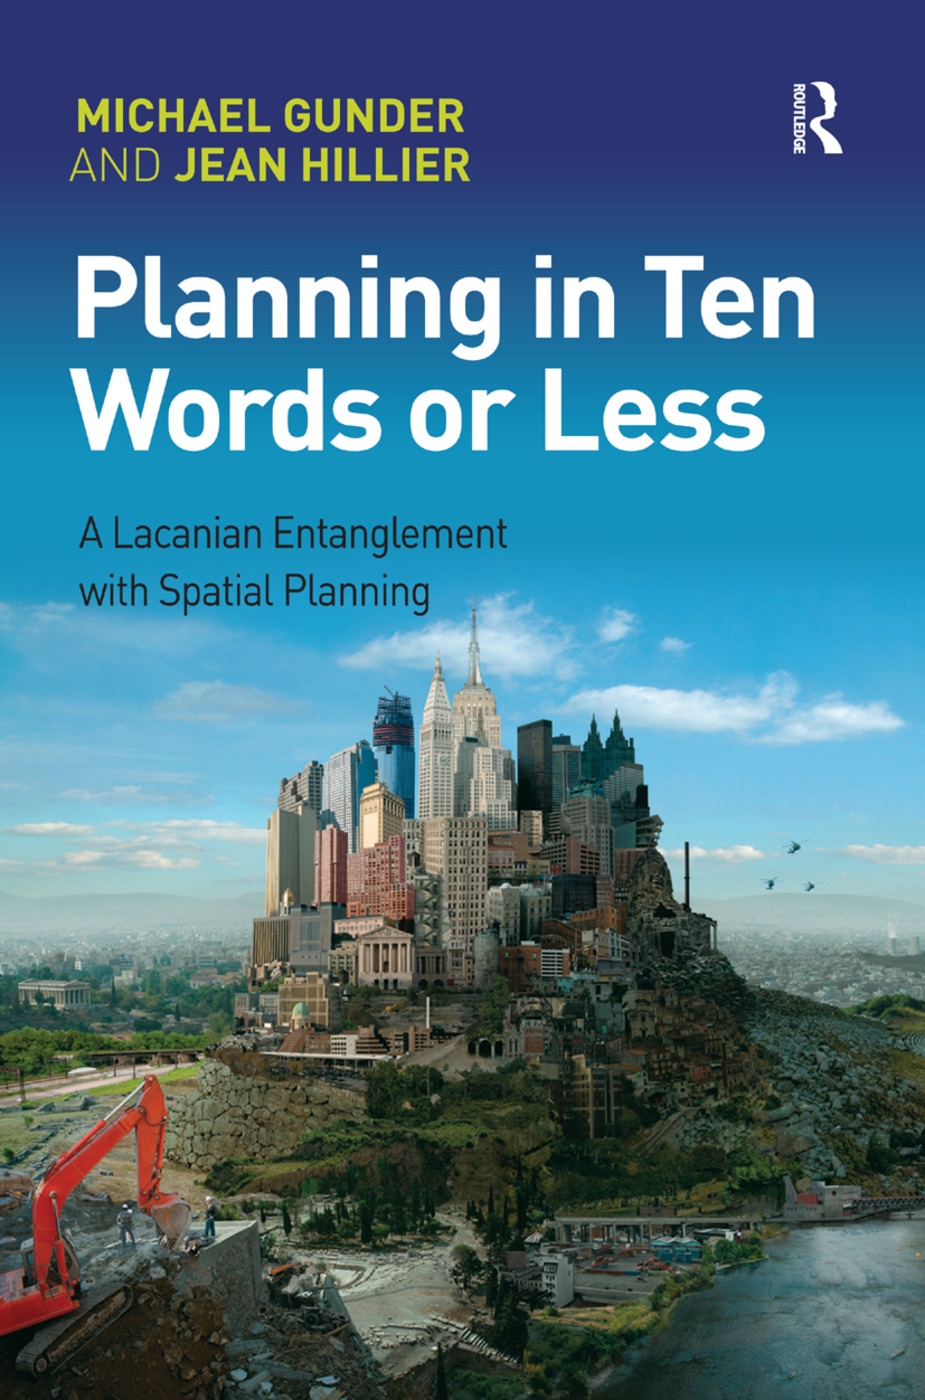 Planning in Ten Words or Less: A Lacanian Entanglement with Spatial Planning. Michael Gunder and Jean Hillier